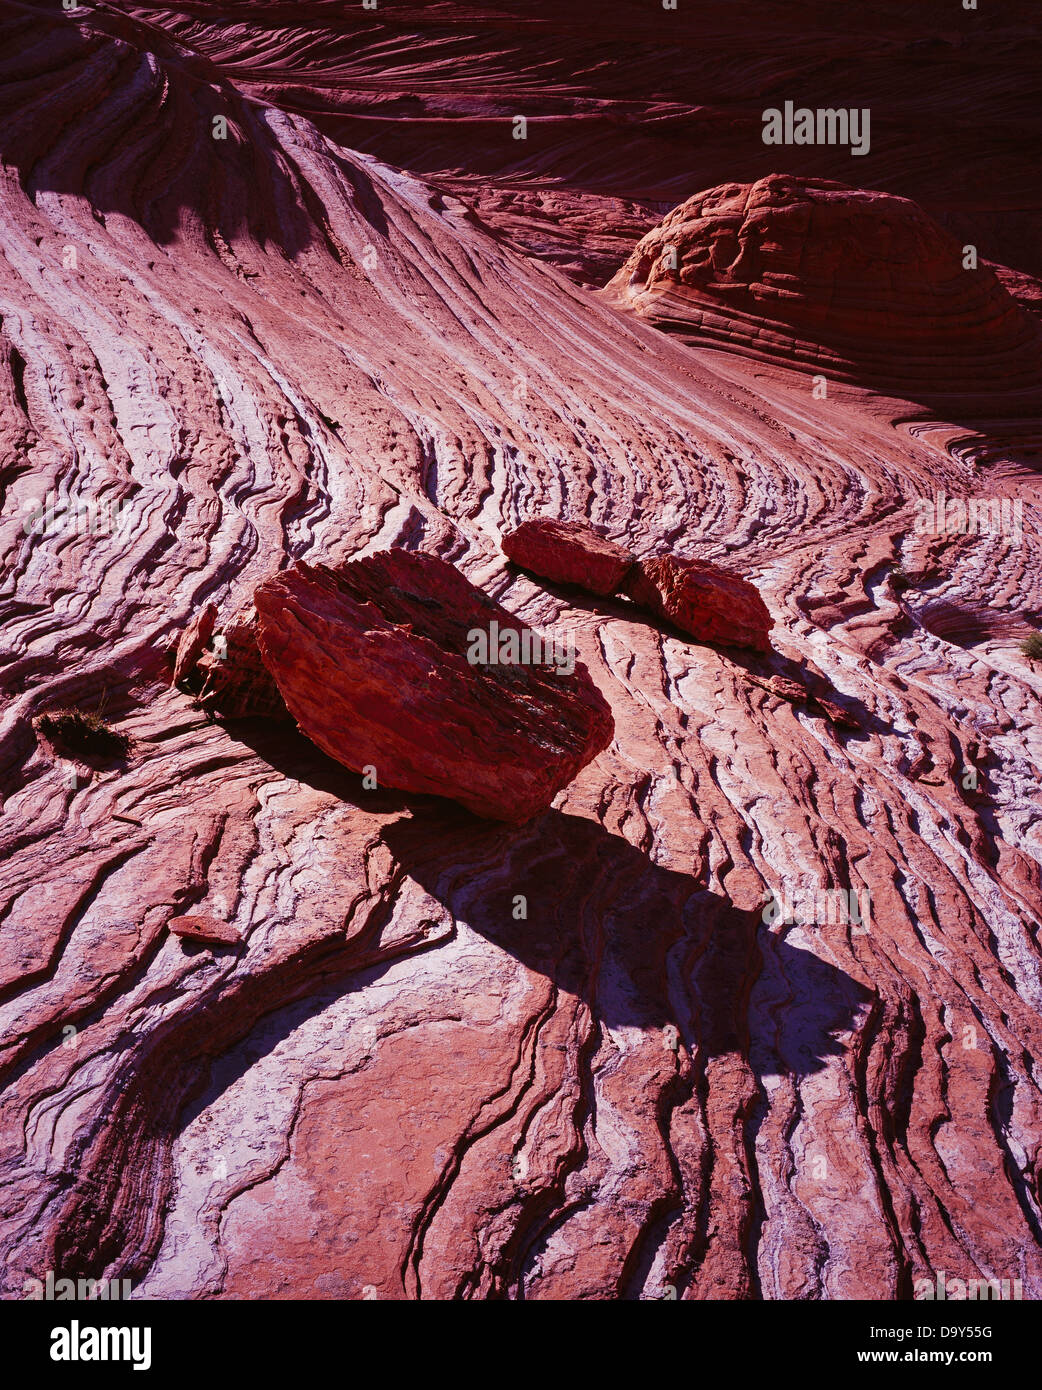 Navajo Sandstone boulders and intricate bedding pattern, Paria Canyon Vermilion Cliffs Wilderness, Utah. Stock Photo